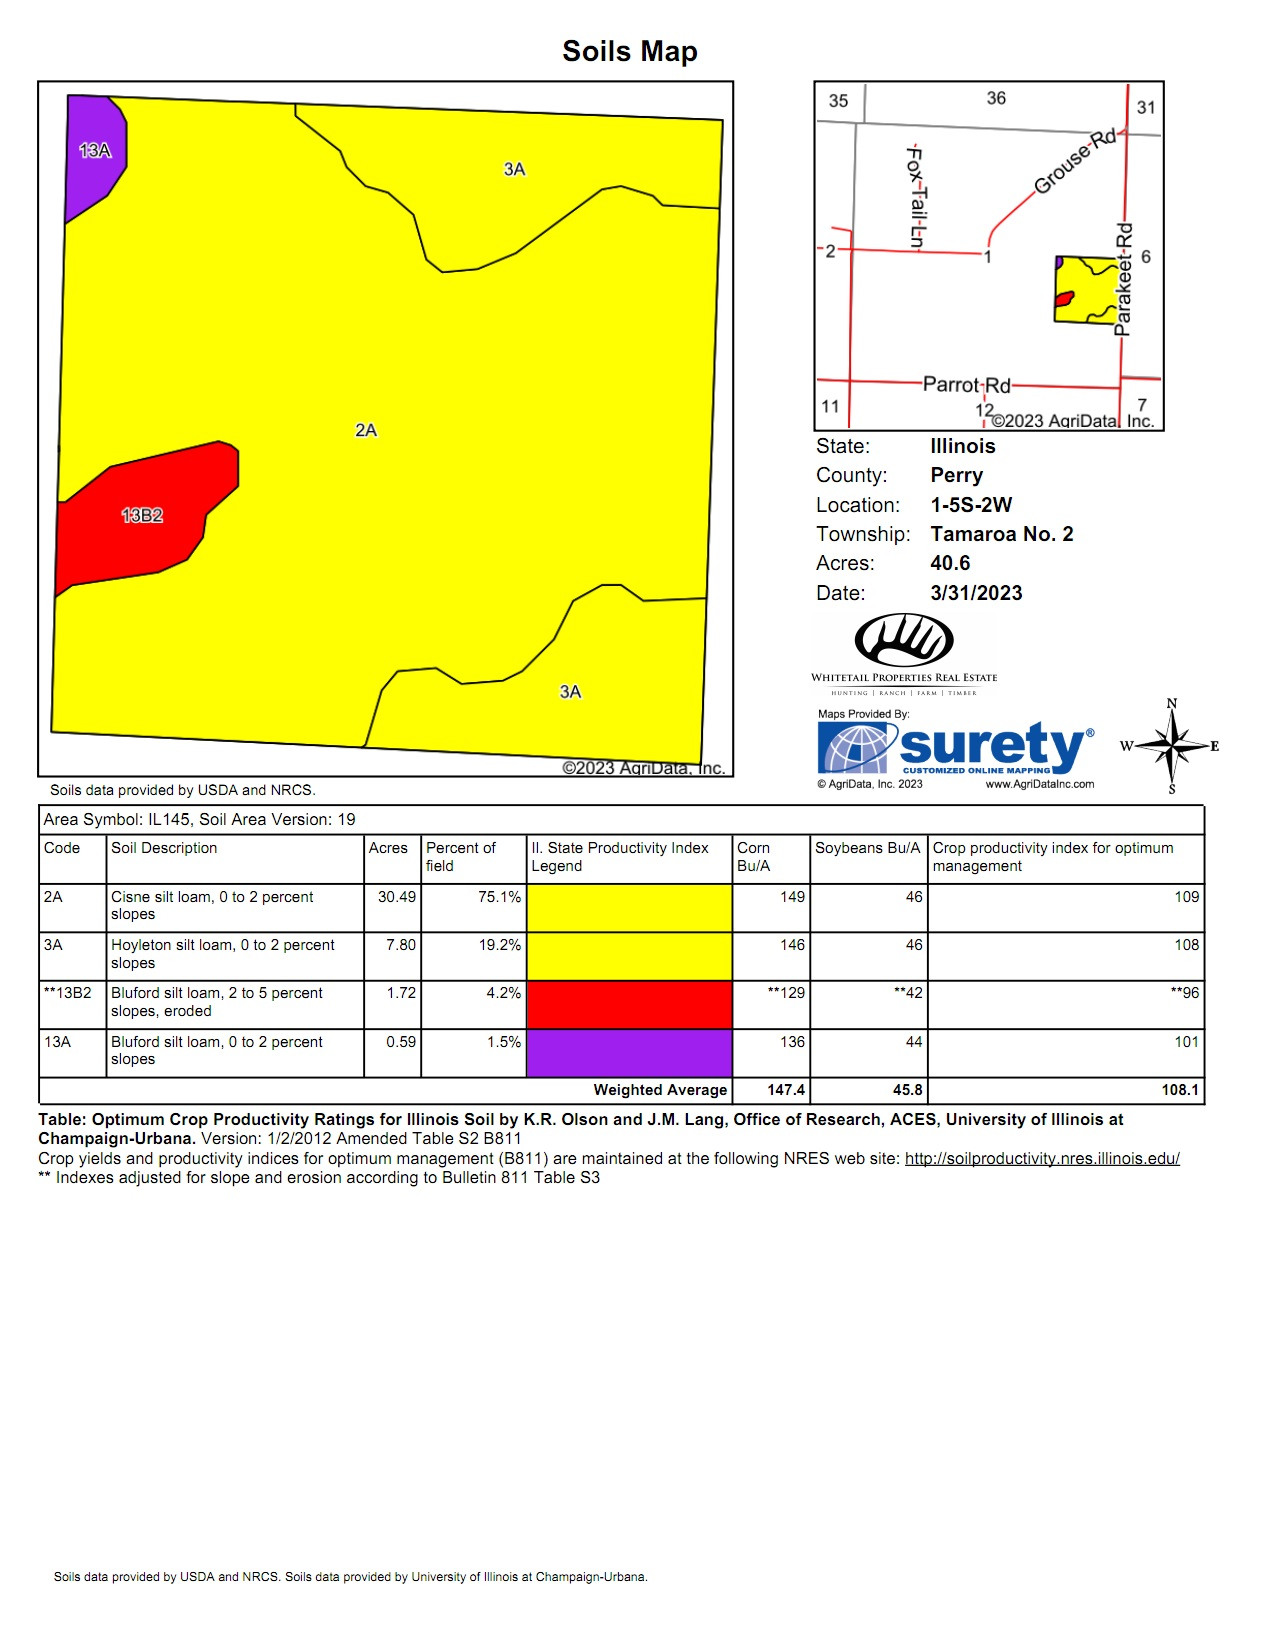 Tract 1 Soils Map 13